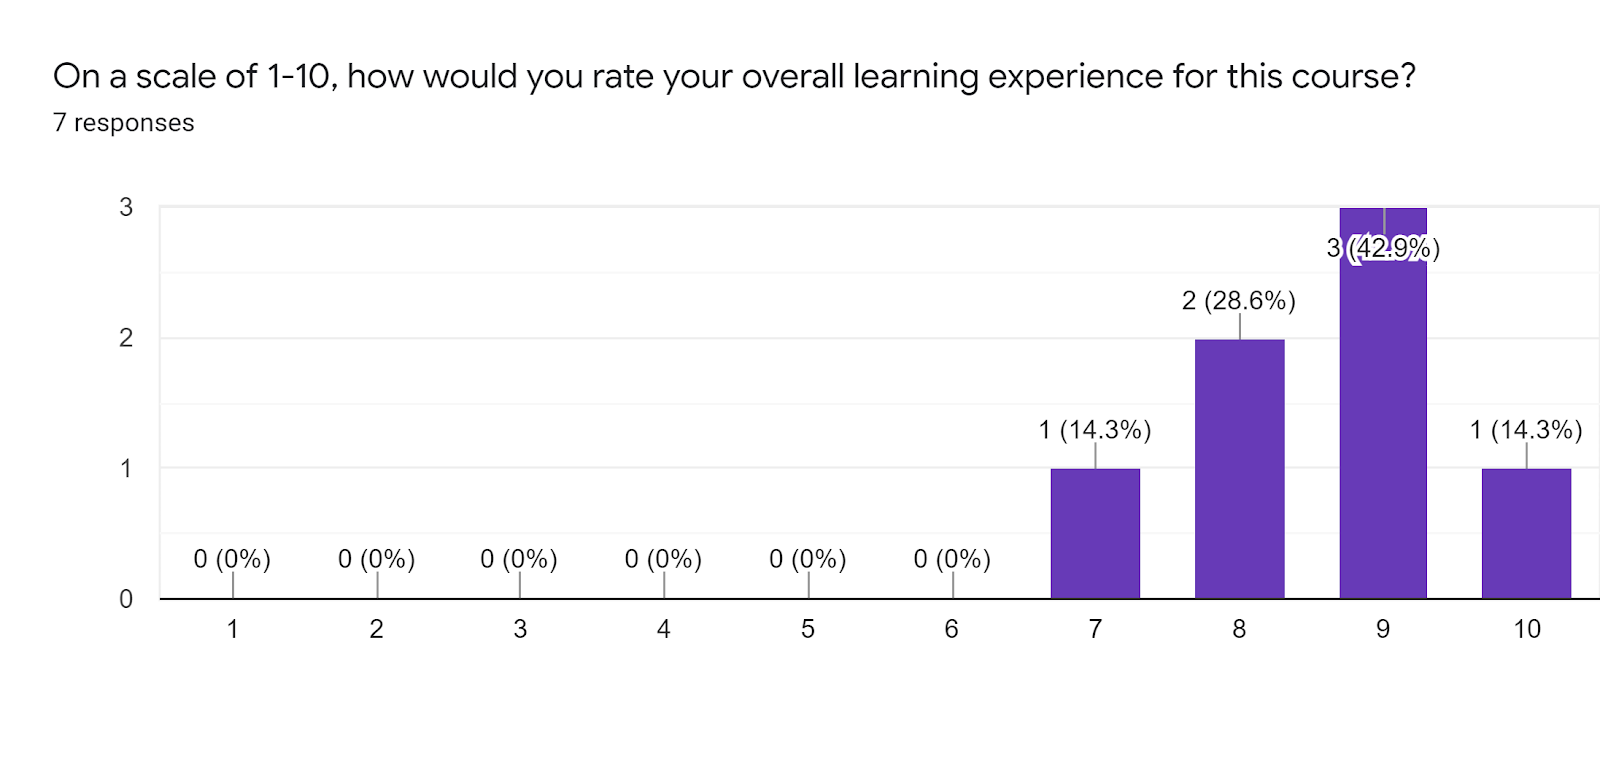 Forms response chart. Question title: On a scale of 1-10, how would you rate your overall learning experience for this course?. Number of responses: 7 responses.